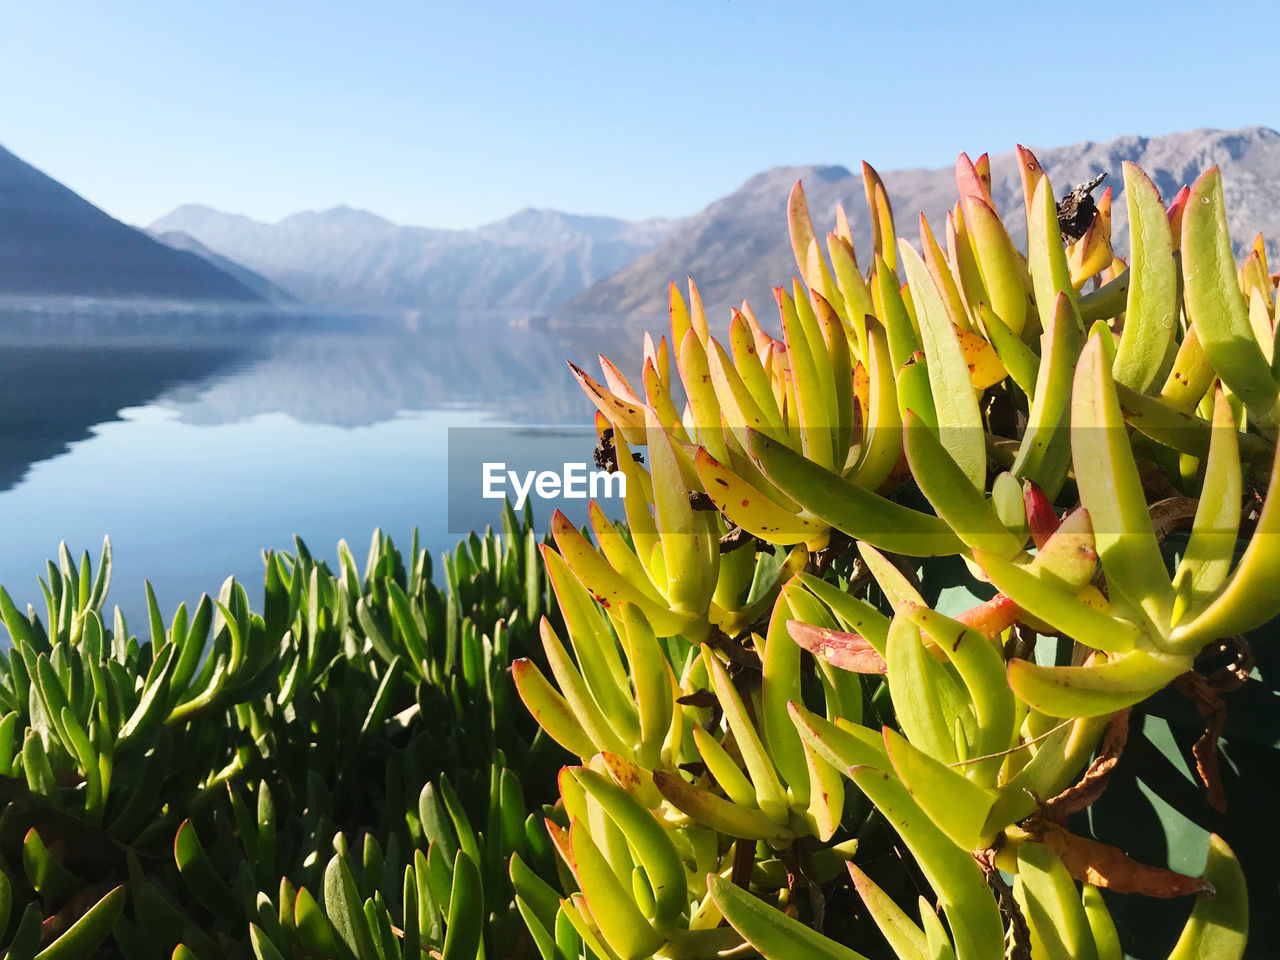 Close-up of plants growing by lake against sky